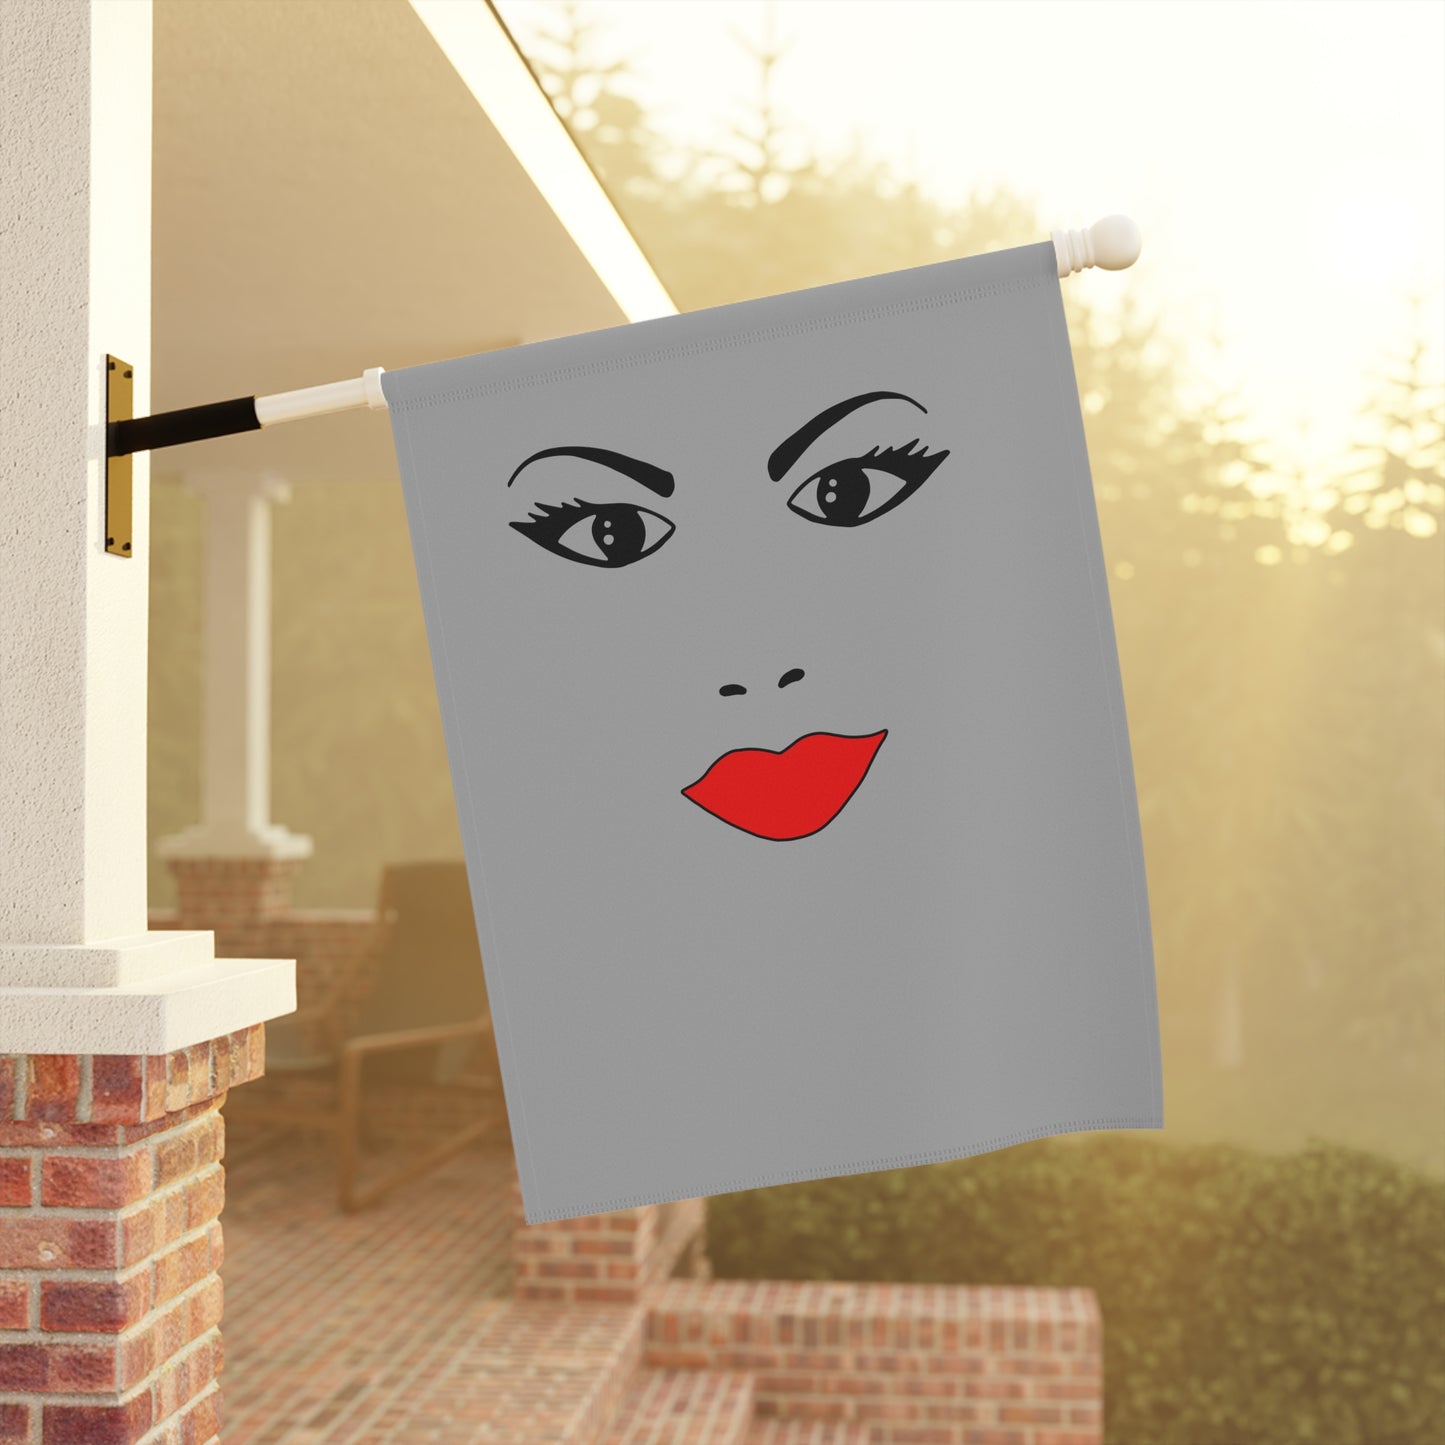 Witch Face printed Garden & House Banner For Halloween .: Pole not included